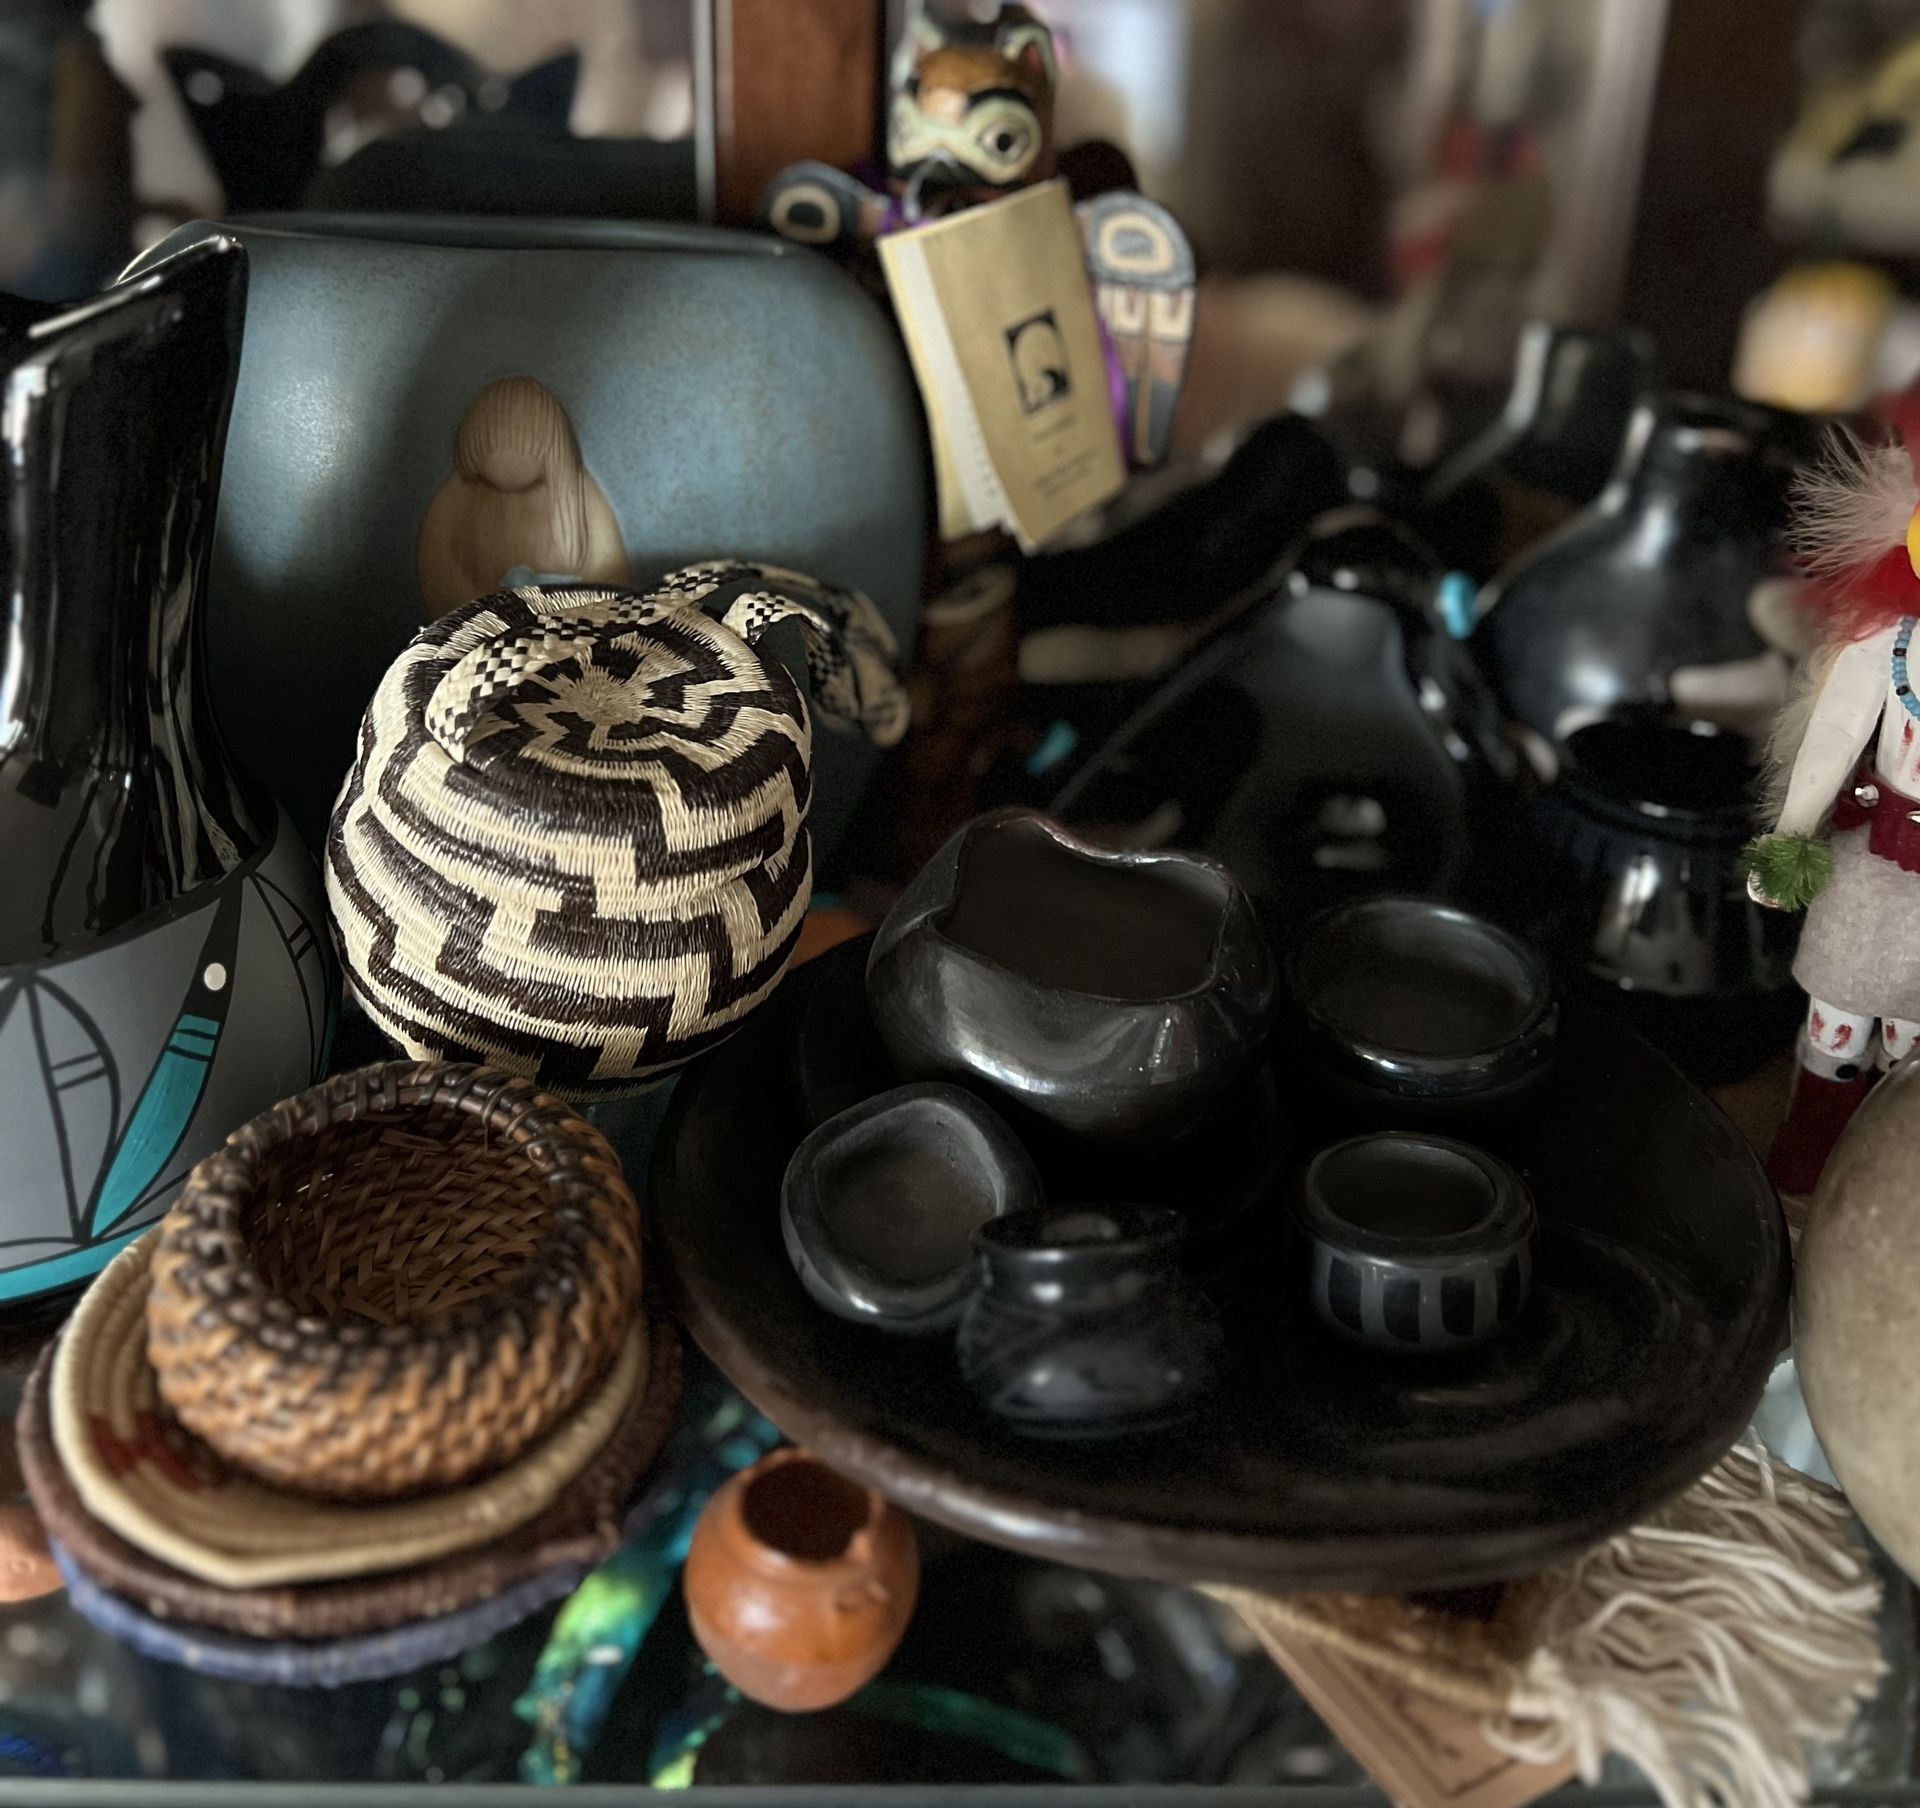 Pottery, Figurines, And Baskets